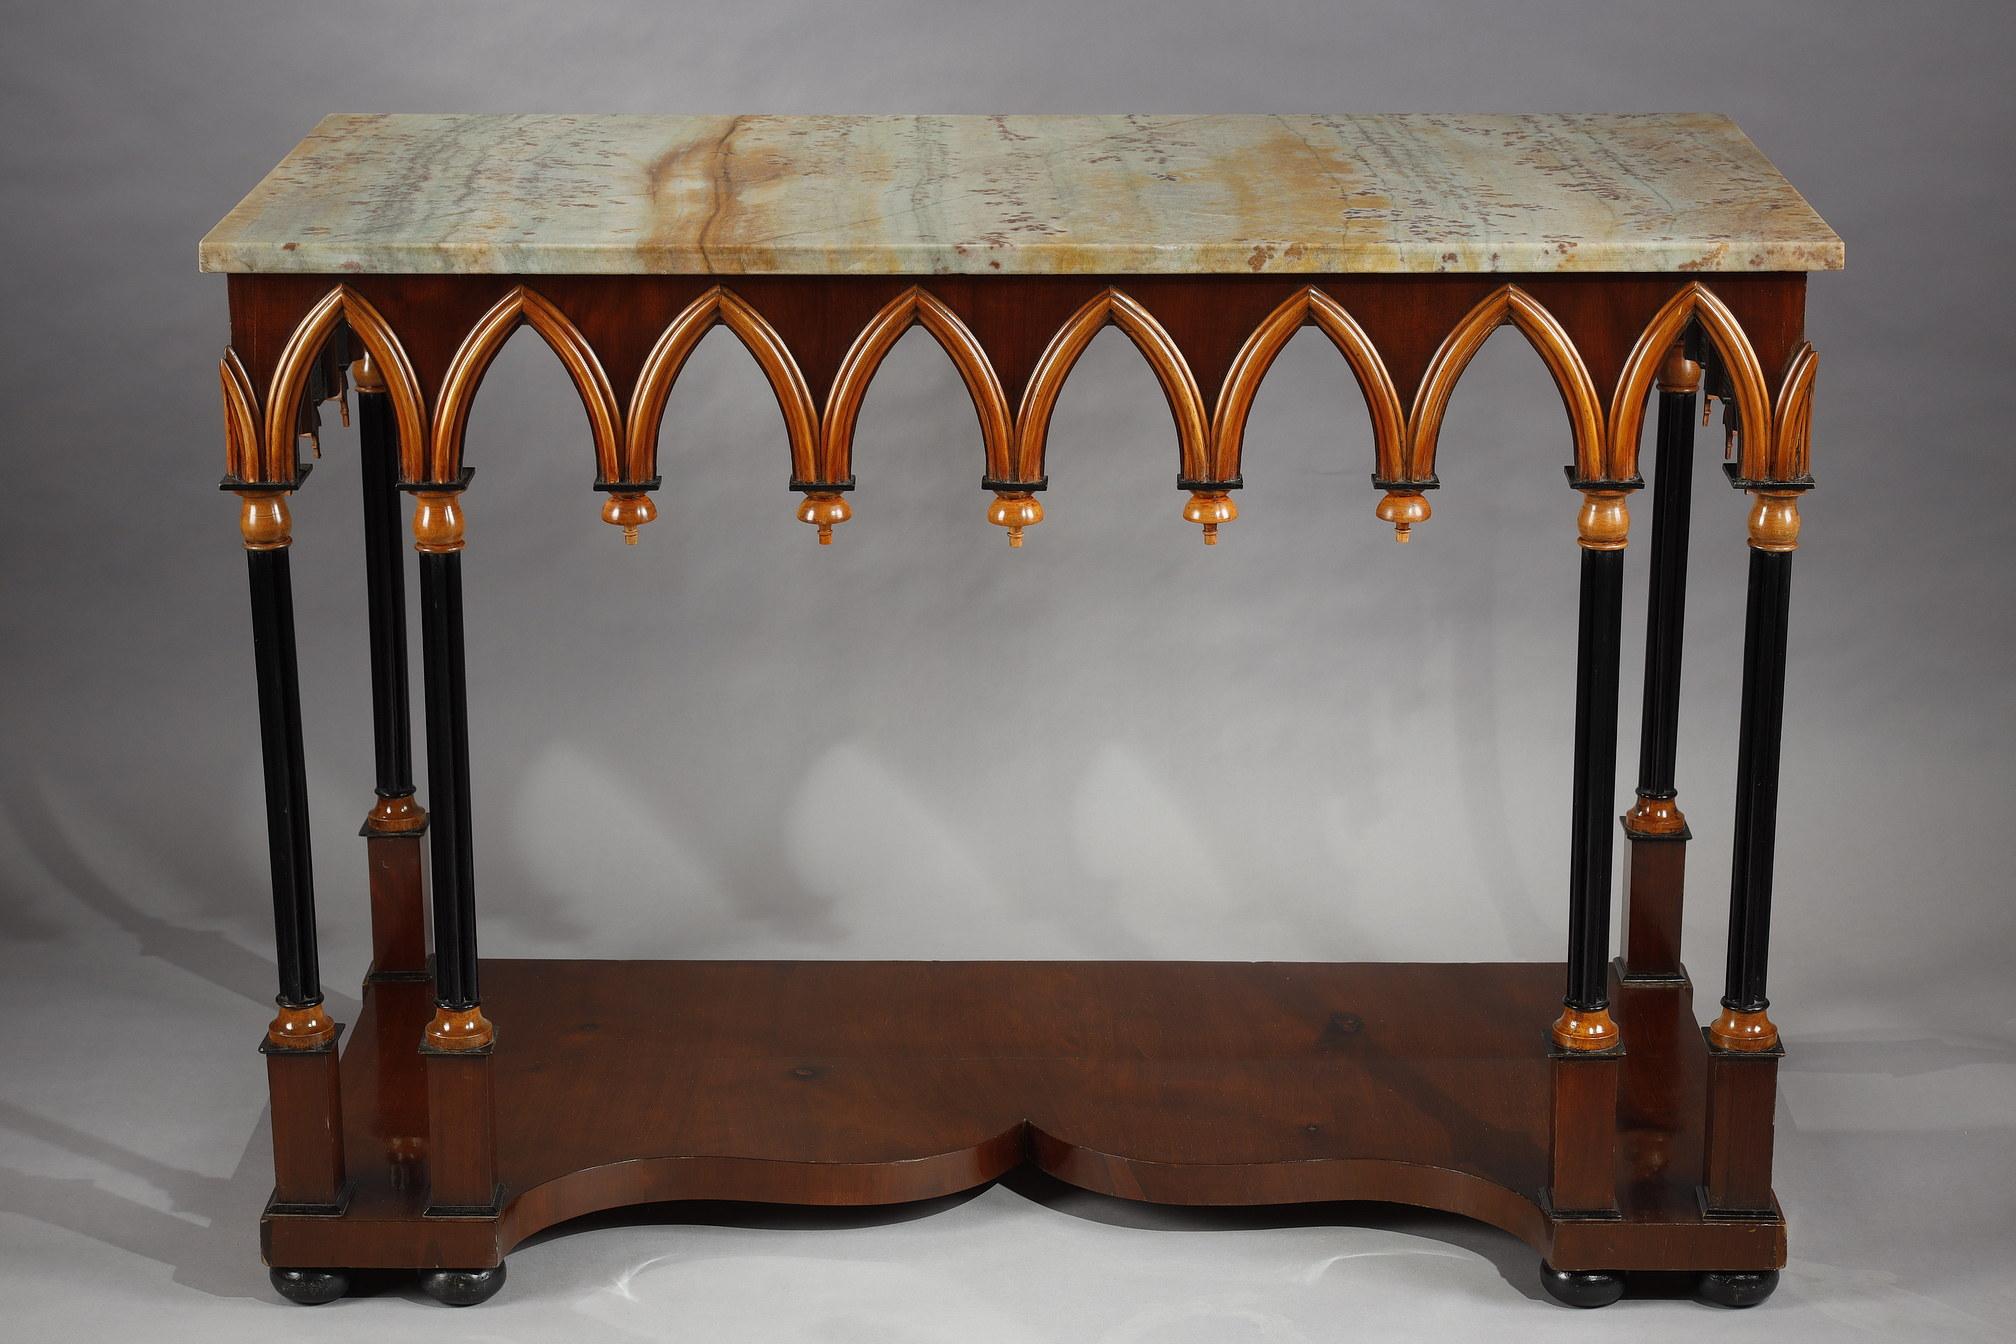 Beautiful neo-Gothic style wooden console table. The veined marble top is underlined by a succession of broken molded arches evoking gothic architecture, and rests on six four-lobed columns with a quadrangular base, resting on an accolade-shaped